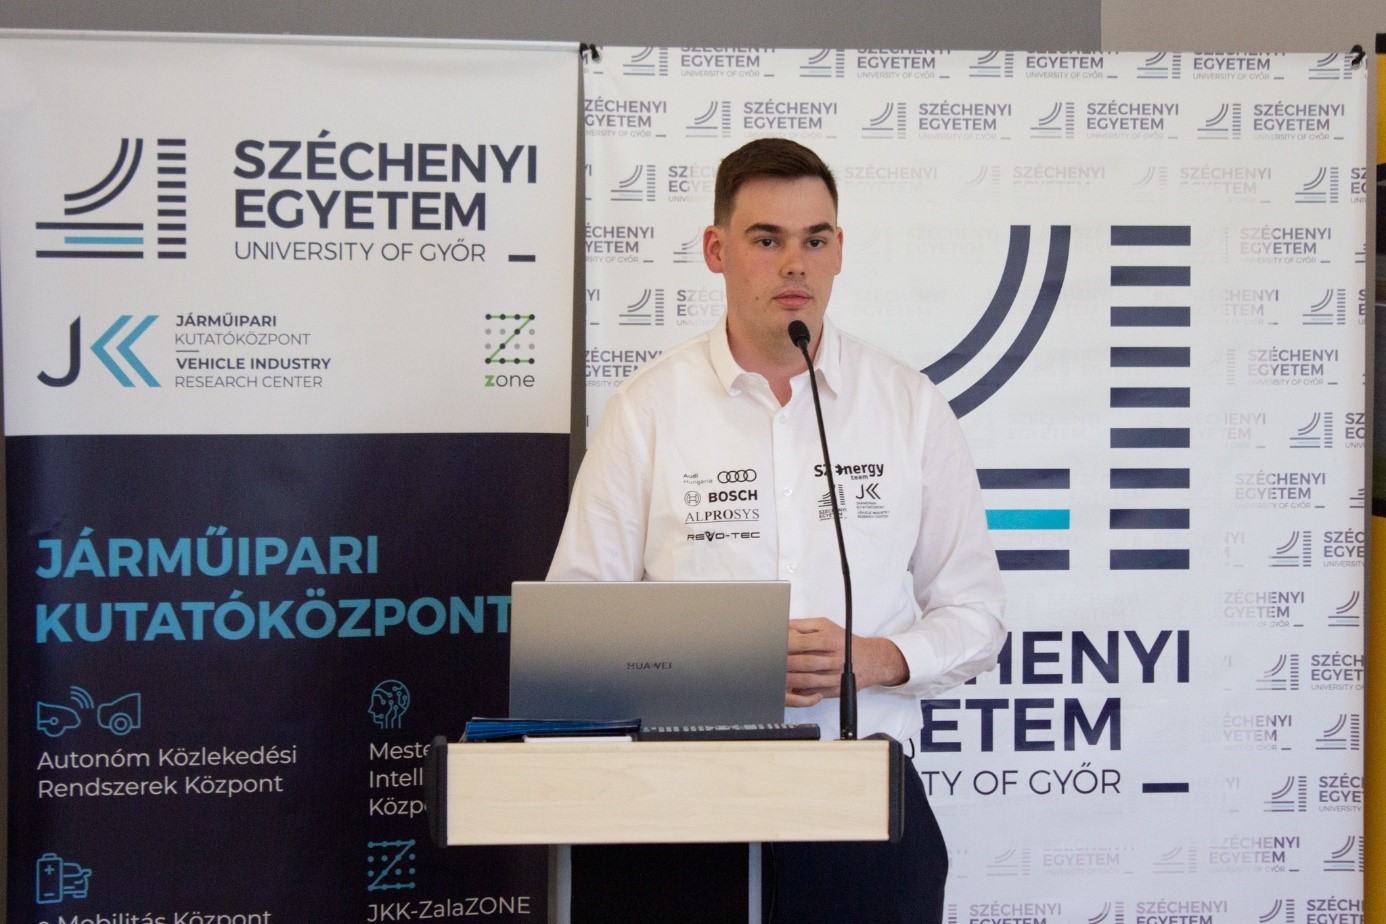 Balázs Für spoke about the development of the engineering department 